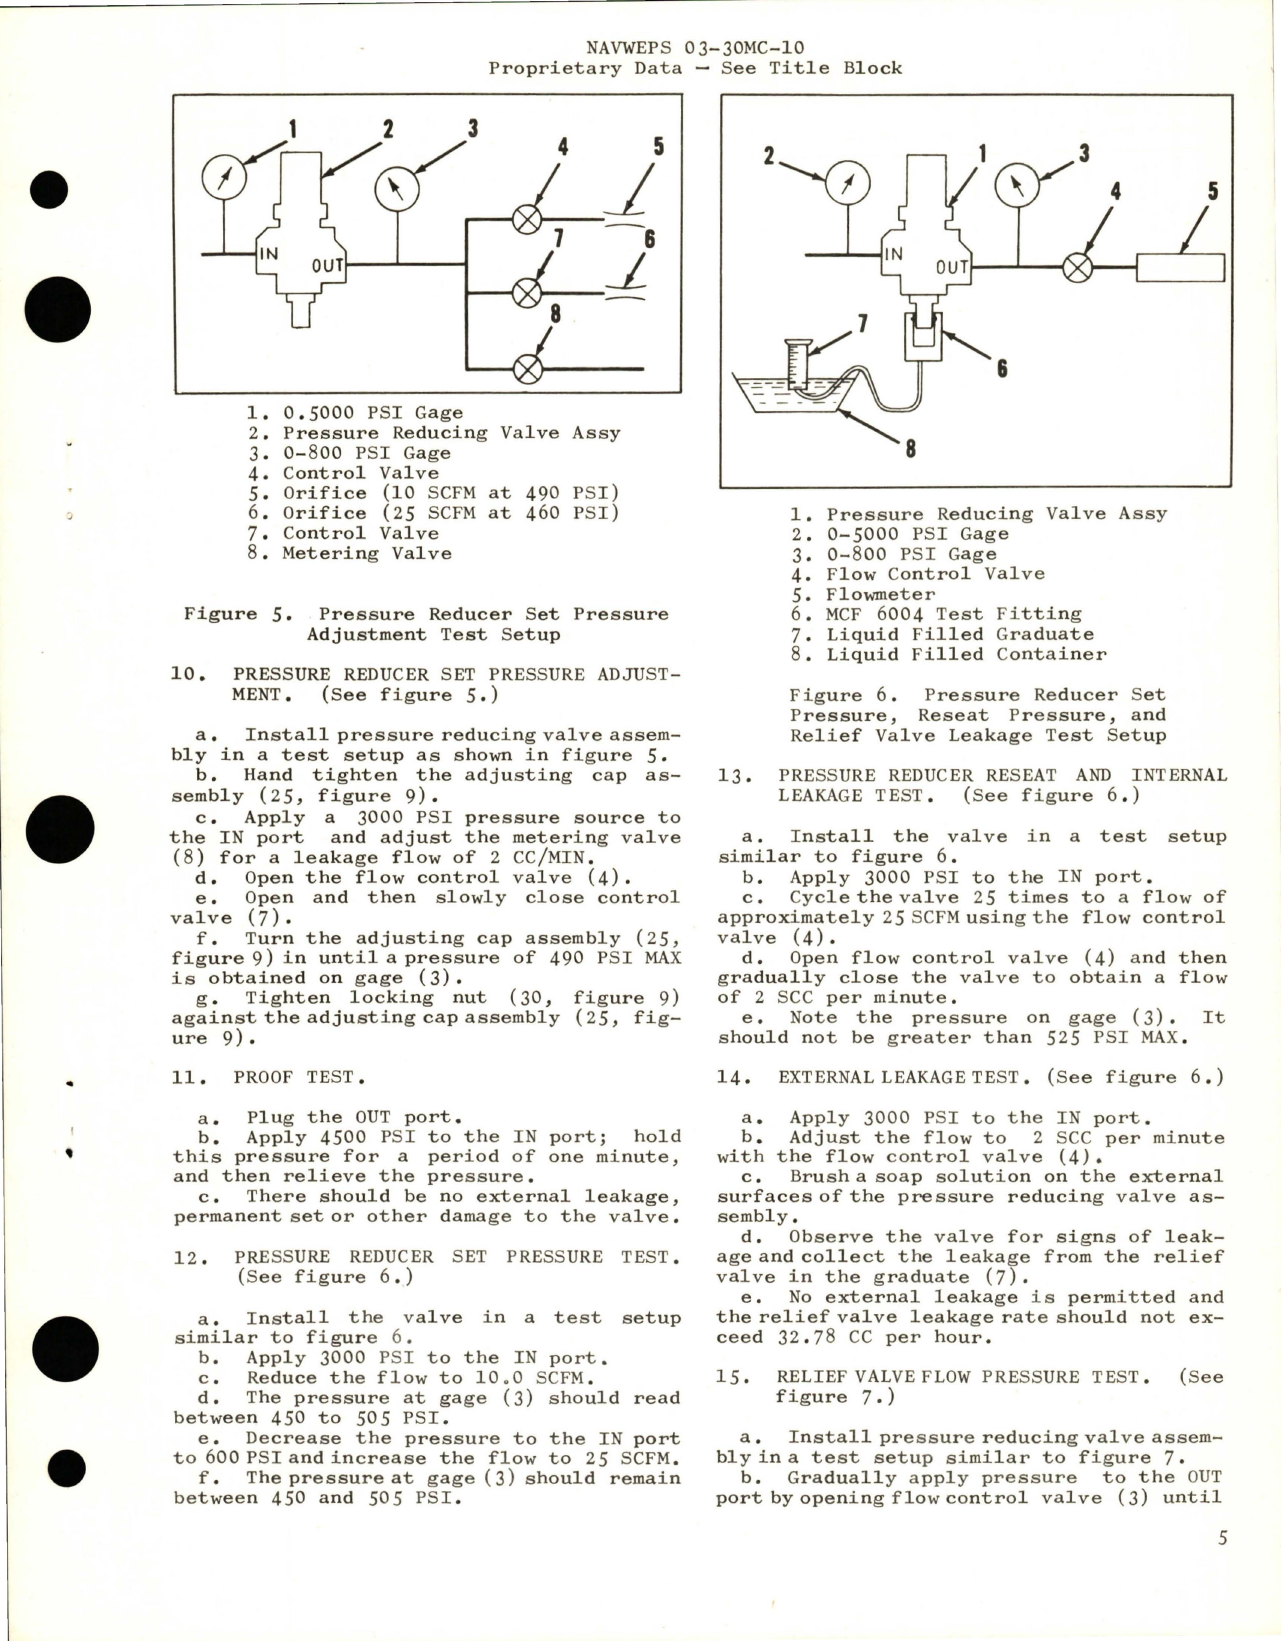 Sample page 5 from AirCorps Library document: Overhaul with Parts Breakdown for Pressure Reducing Valve - MC 3628-1